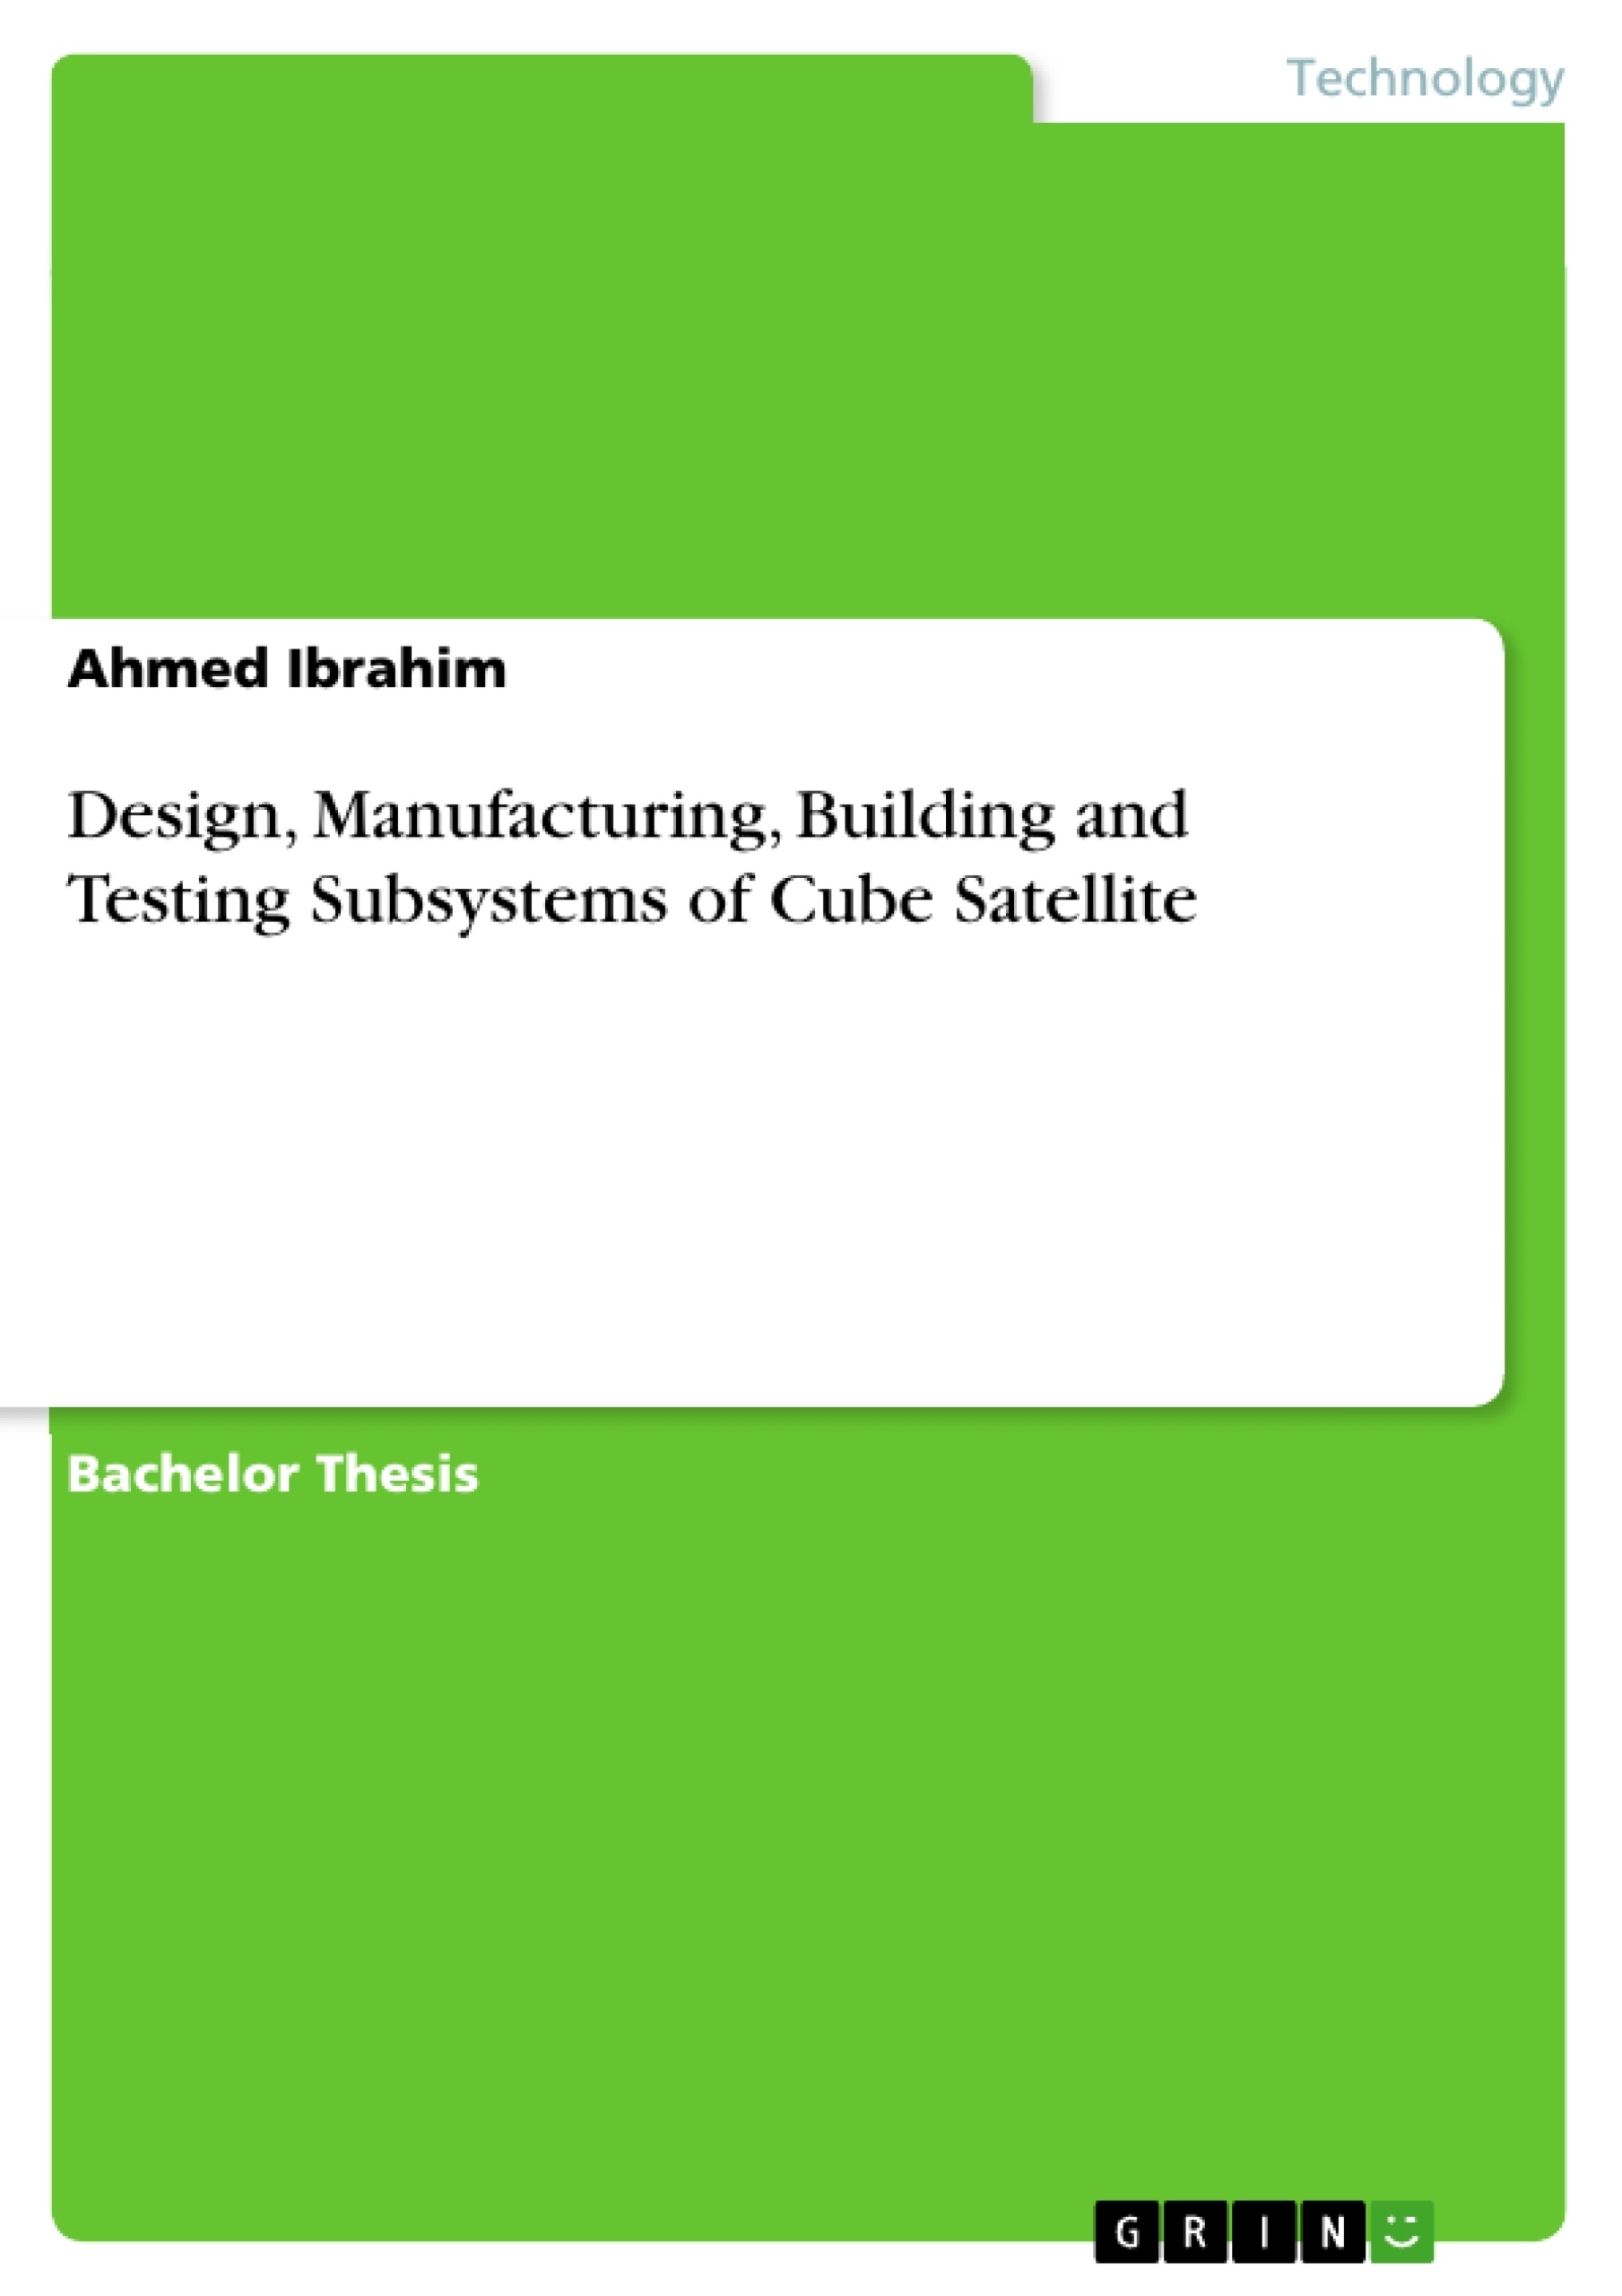 Title: Design, Manufacturing, Building and Testing Subsystems of Cube Satellite